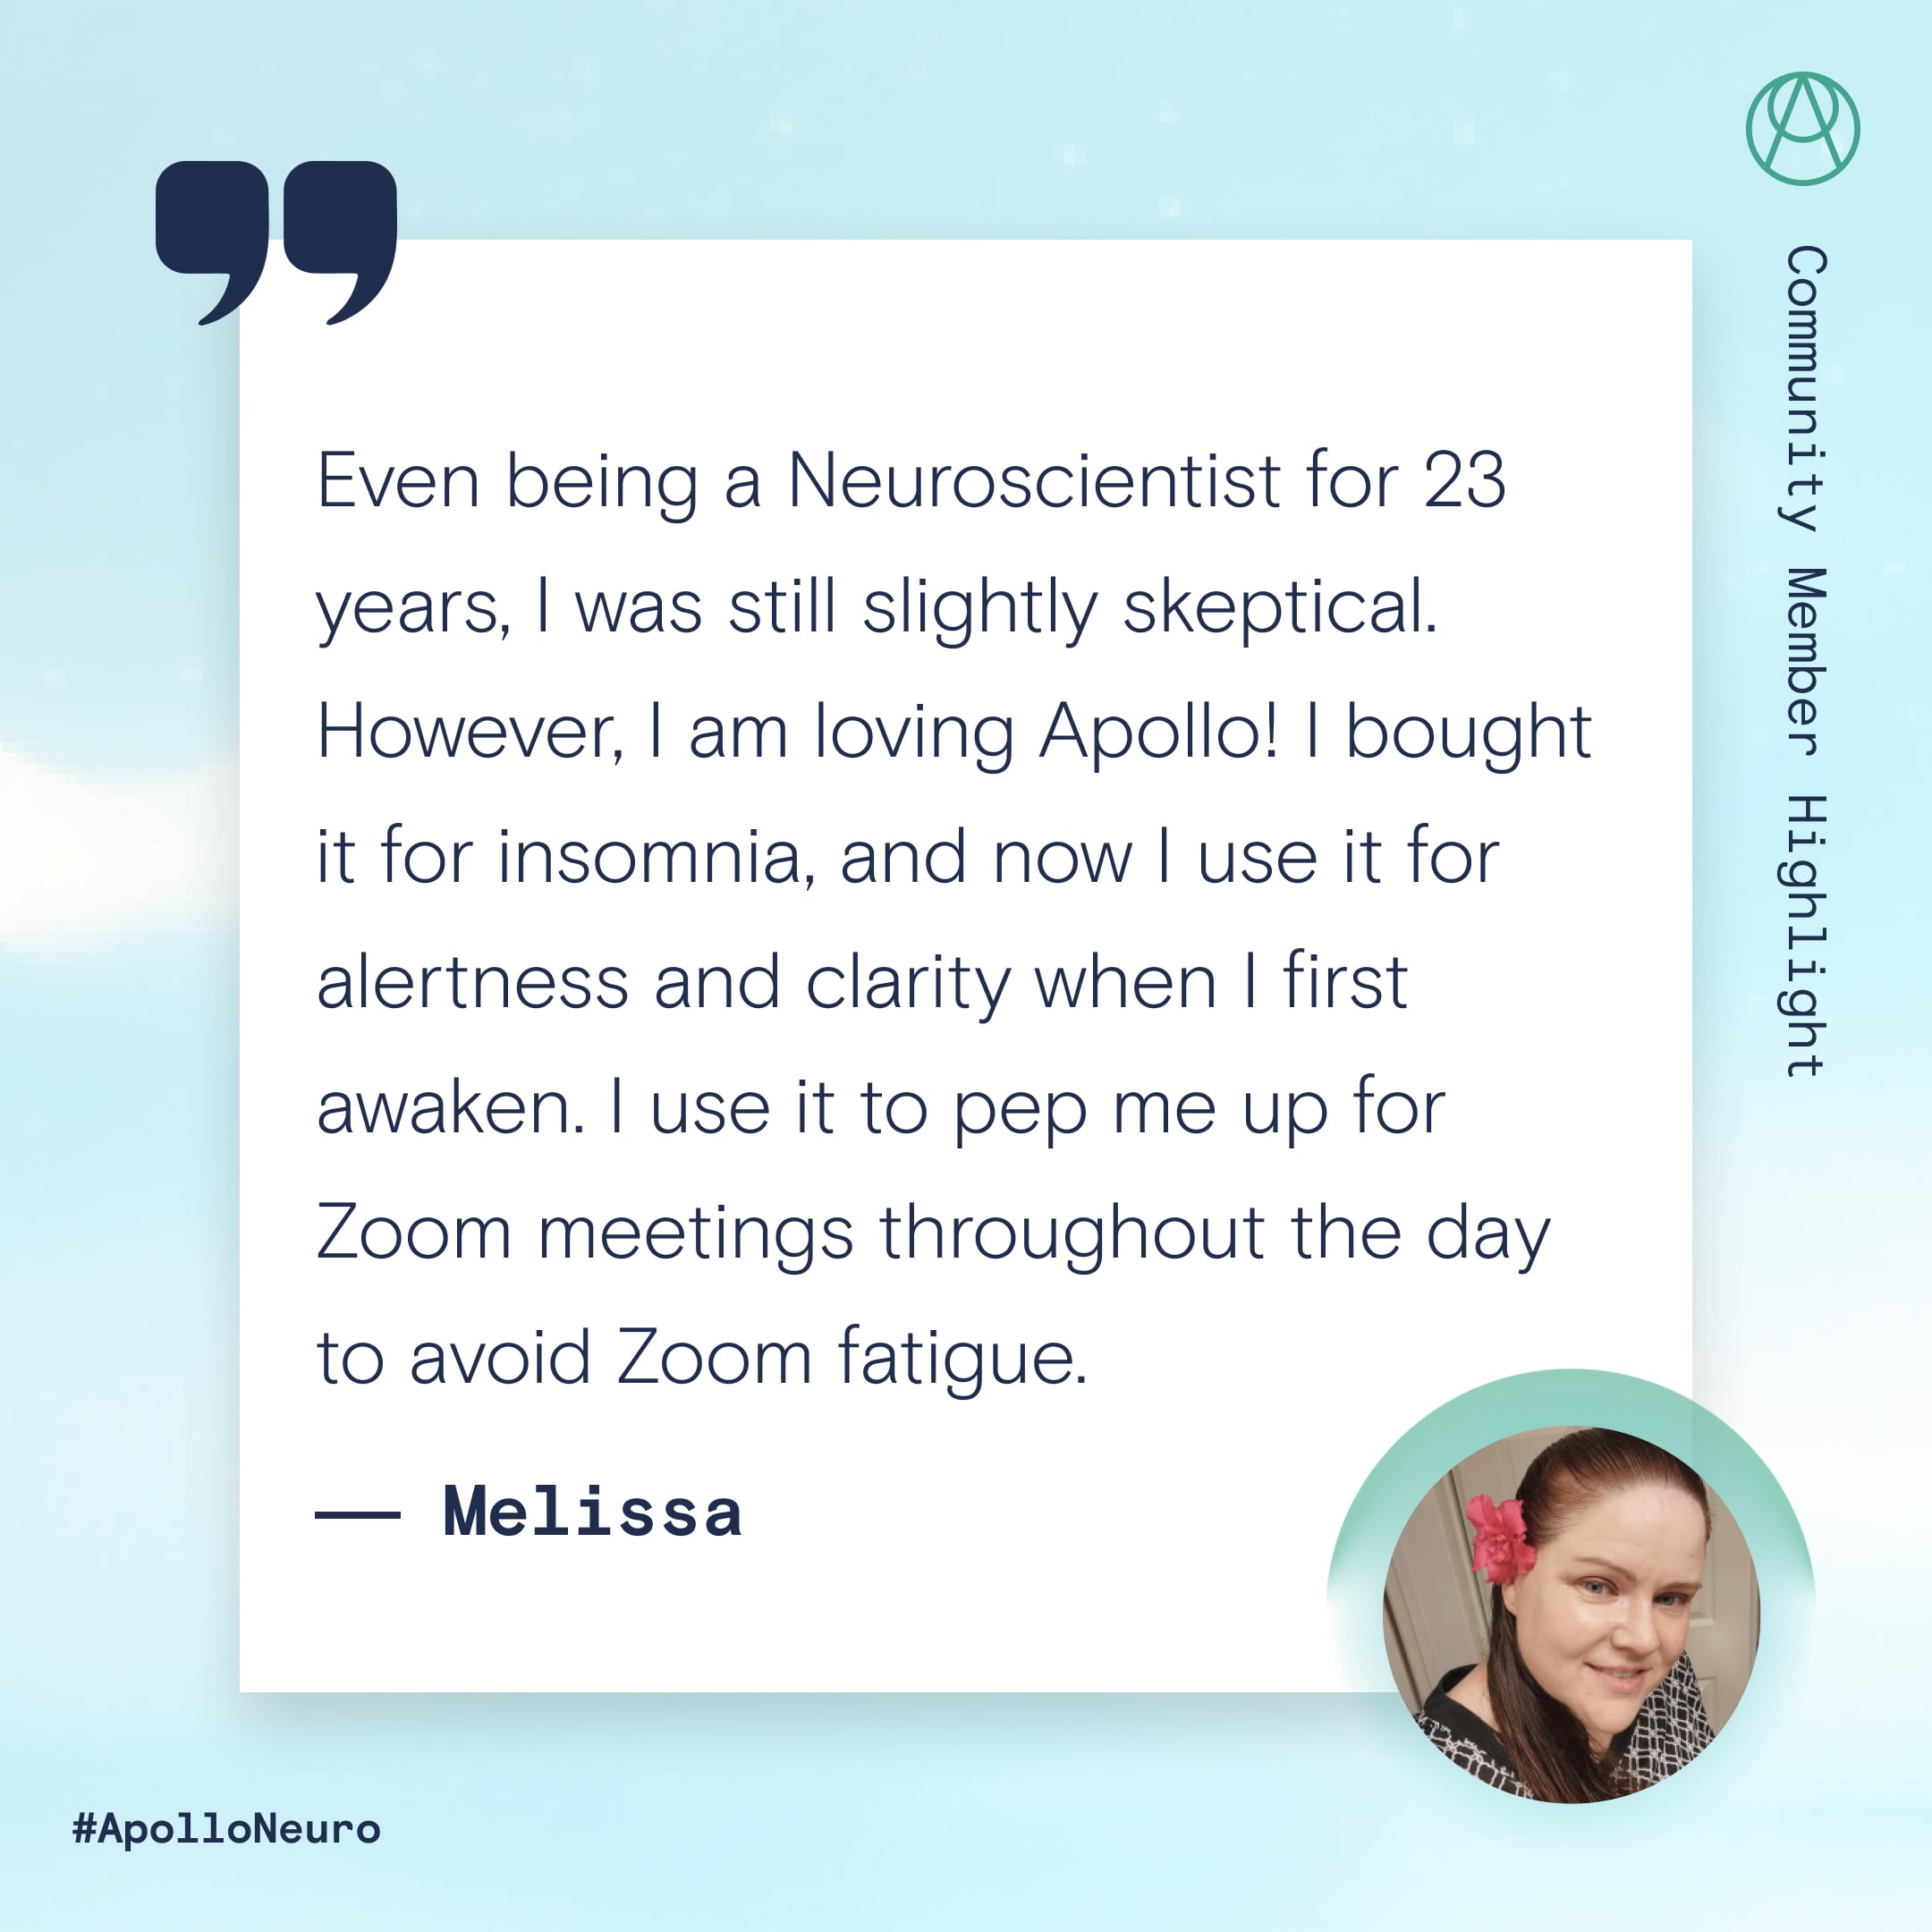 Quote from Melissa: "Even being a Neuroscientist for 23 years, I was still slightly skeptical. However, I am loving Apollo! I bought it for insomnia, and now I use it for alertness and clarity when I first awaken. I use it to pep me up for Zoom meetings throughout the day to avoid Zoom fatigue."